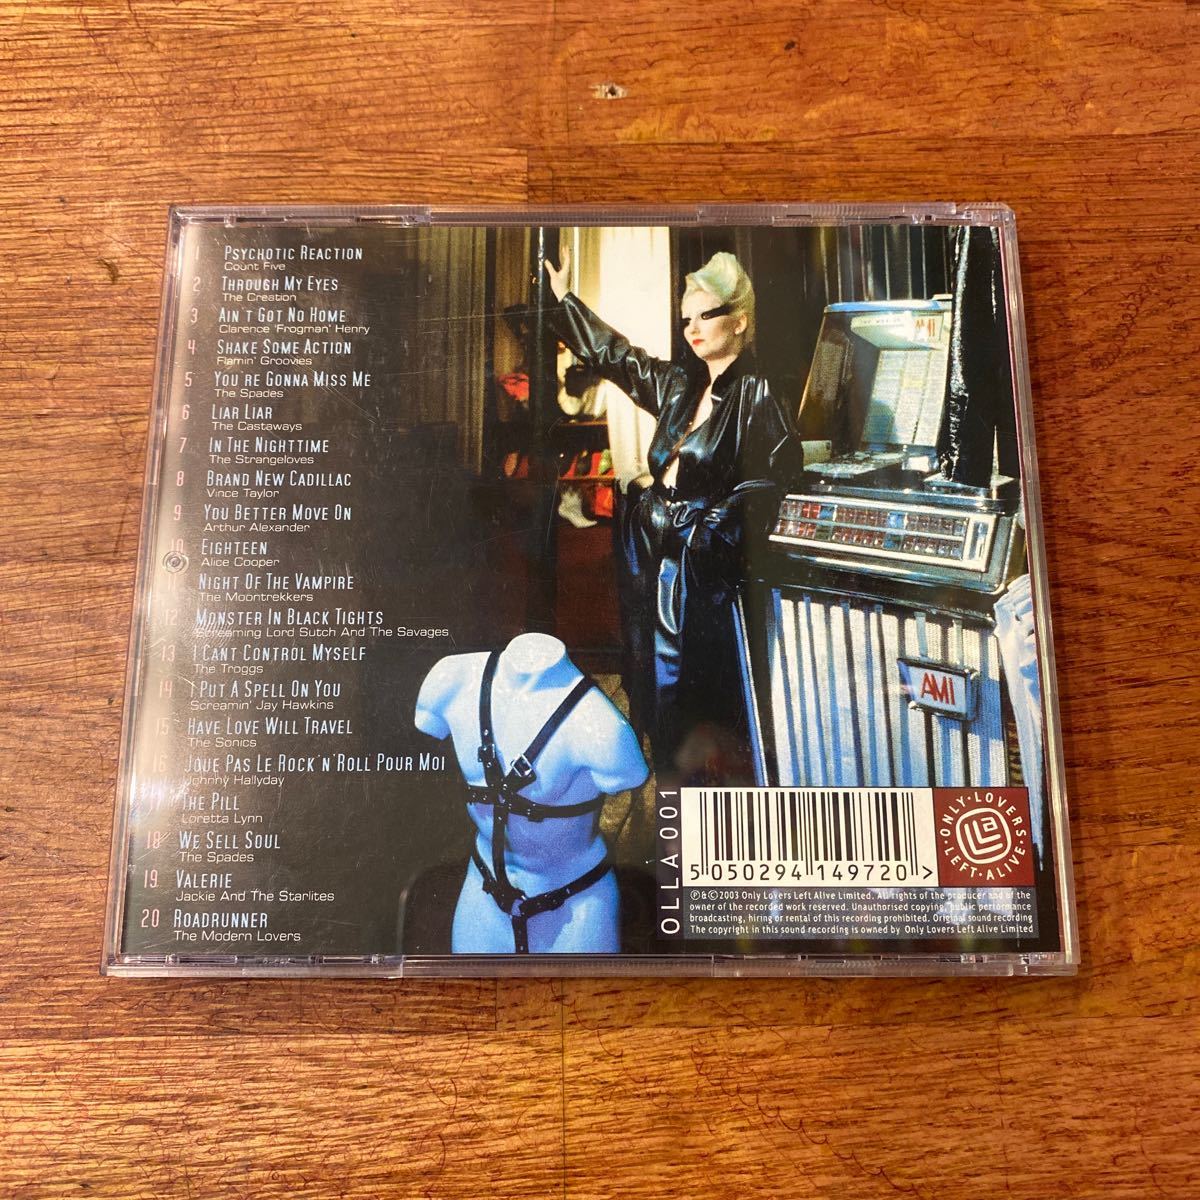 CD-002 V.A - SEX - Too Fast To Live Too Young To Die OLLA-001 2003年 廃盤 希少CD ヴィヴィアンウエストウッド マルコム マクラーレン_画像2